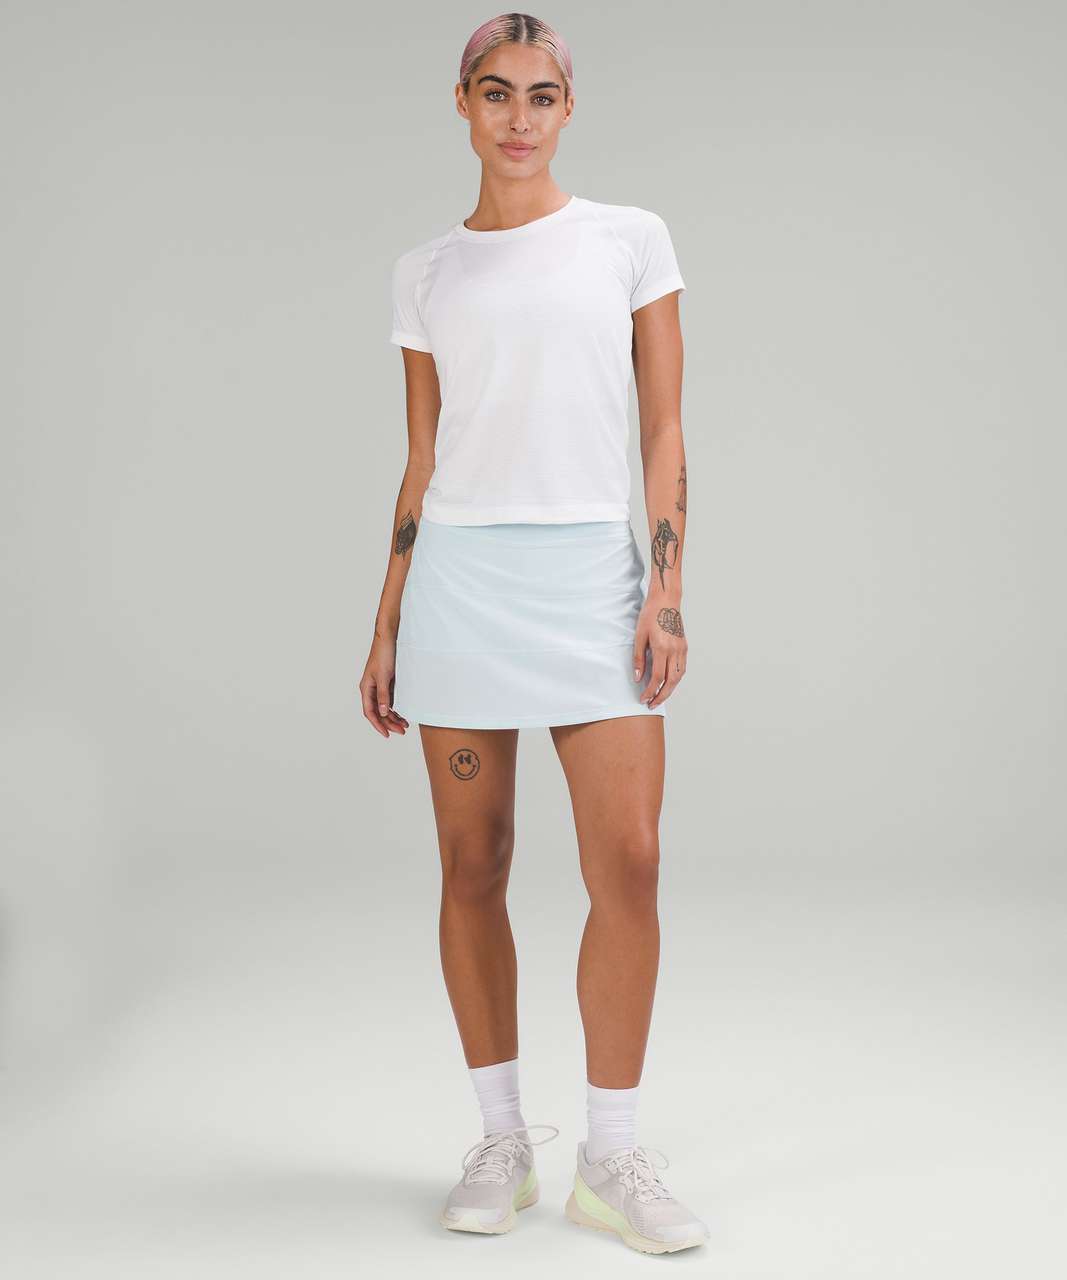 Lululemon Pace Rival Mid-Rise Skirt *Long - Powder Blue (First Release)